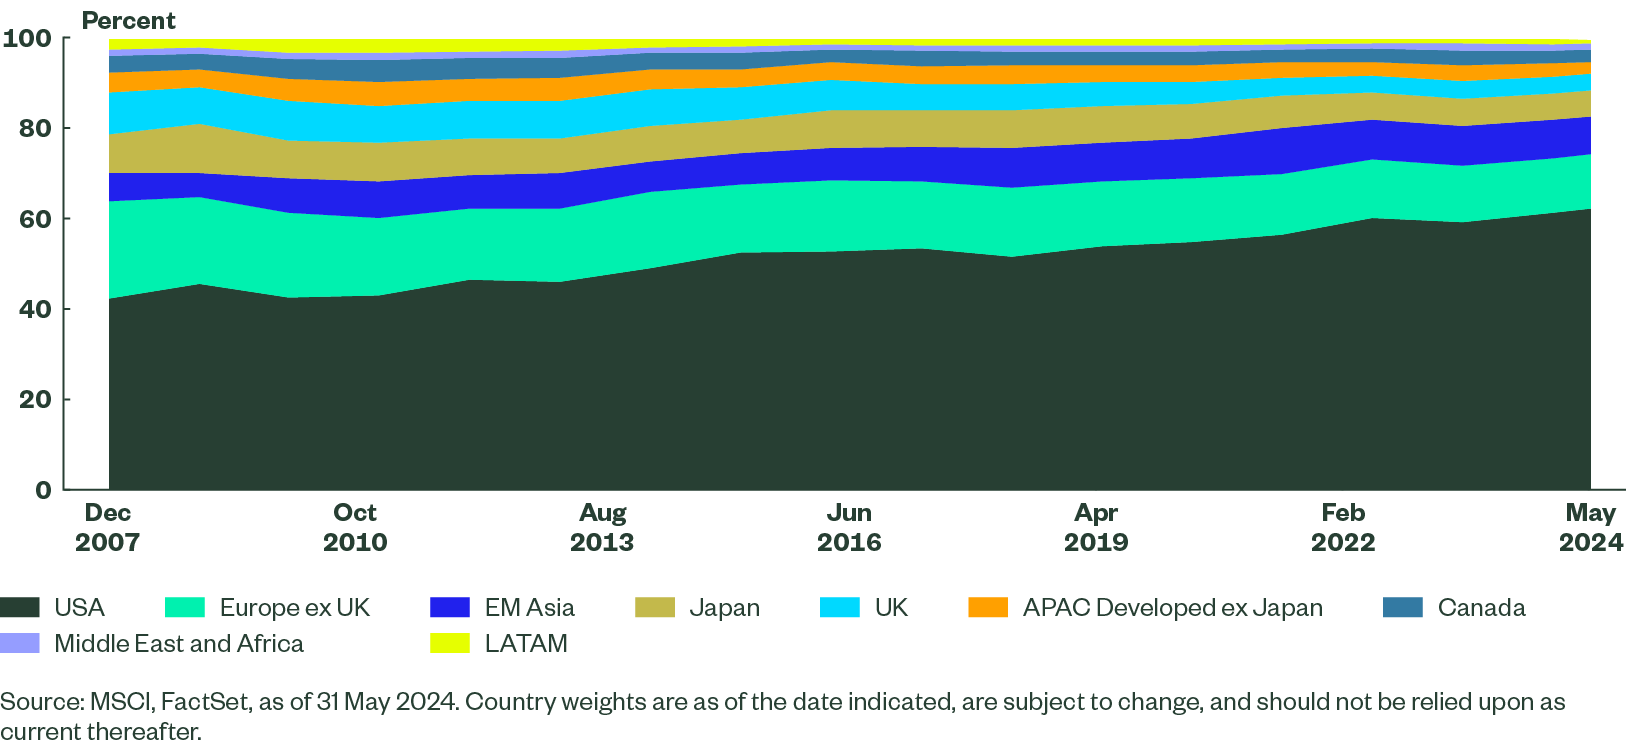 Figure 3 shows the regional makeup of the MSCI ACWI IMI over the last 15 years. The USA has increased its weight over time while most other regions have decreased.